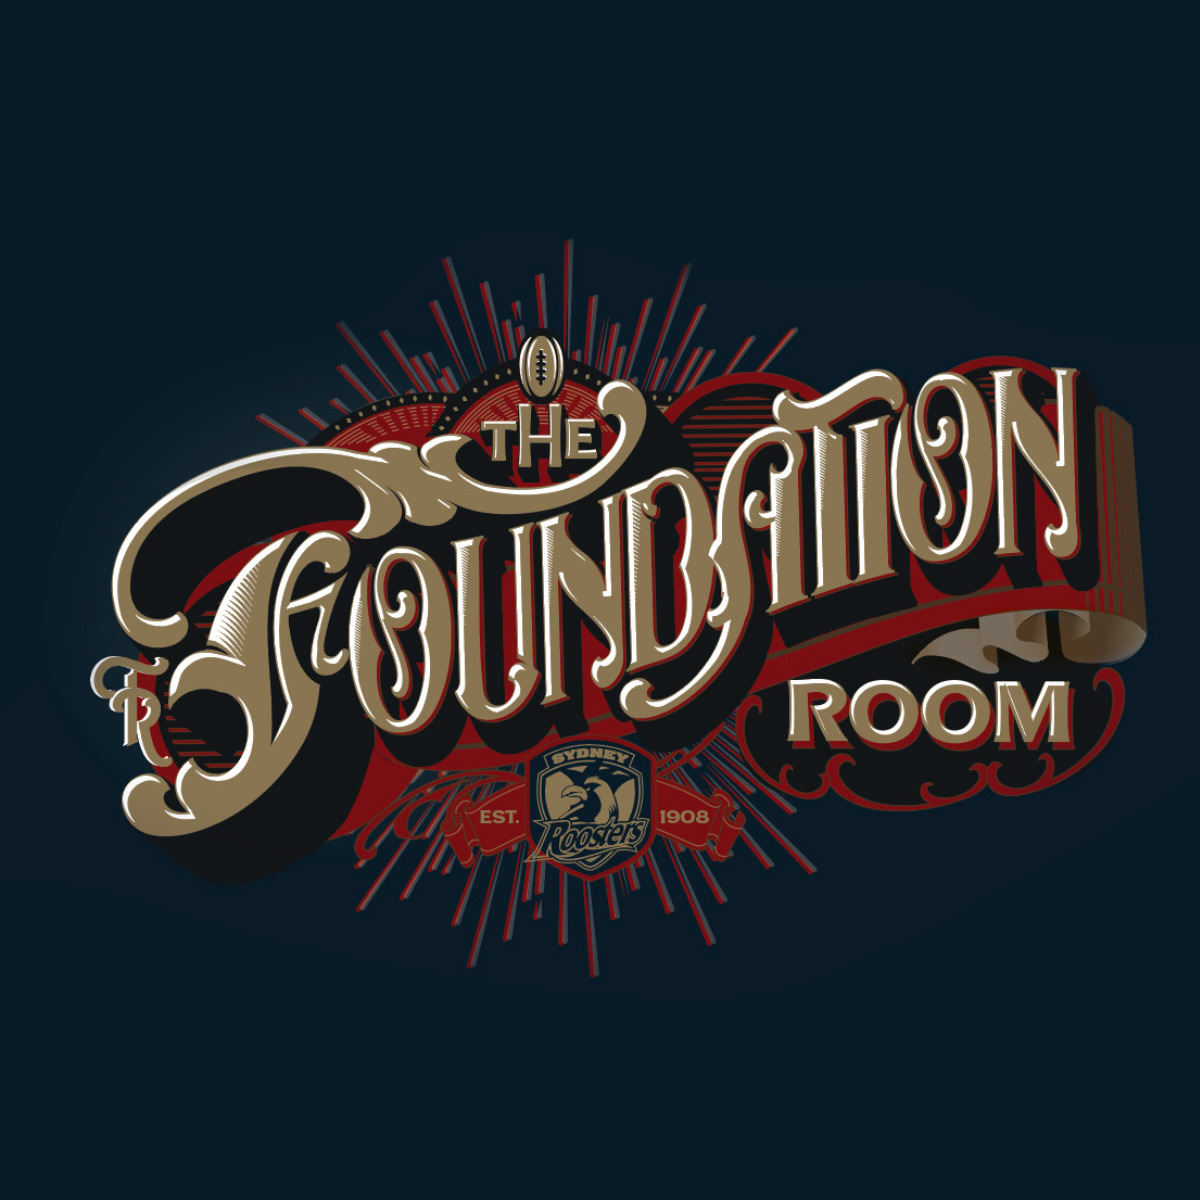 Sydney Roosters typography   branding  logo lettering football sports marketing NRL rugby league The Foundation ROom